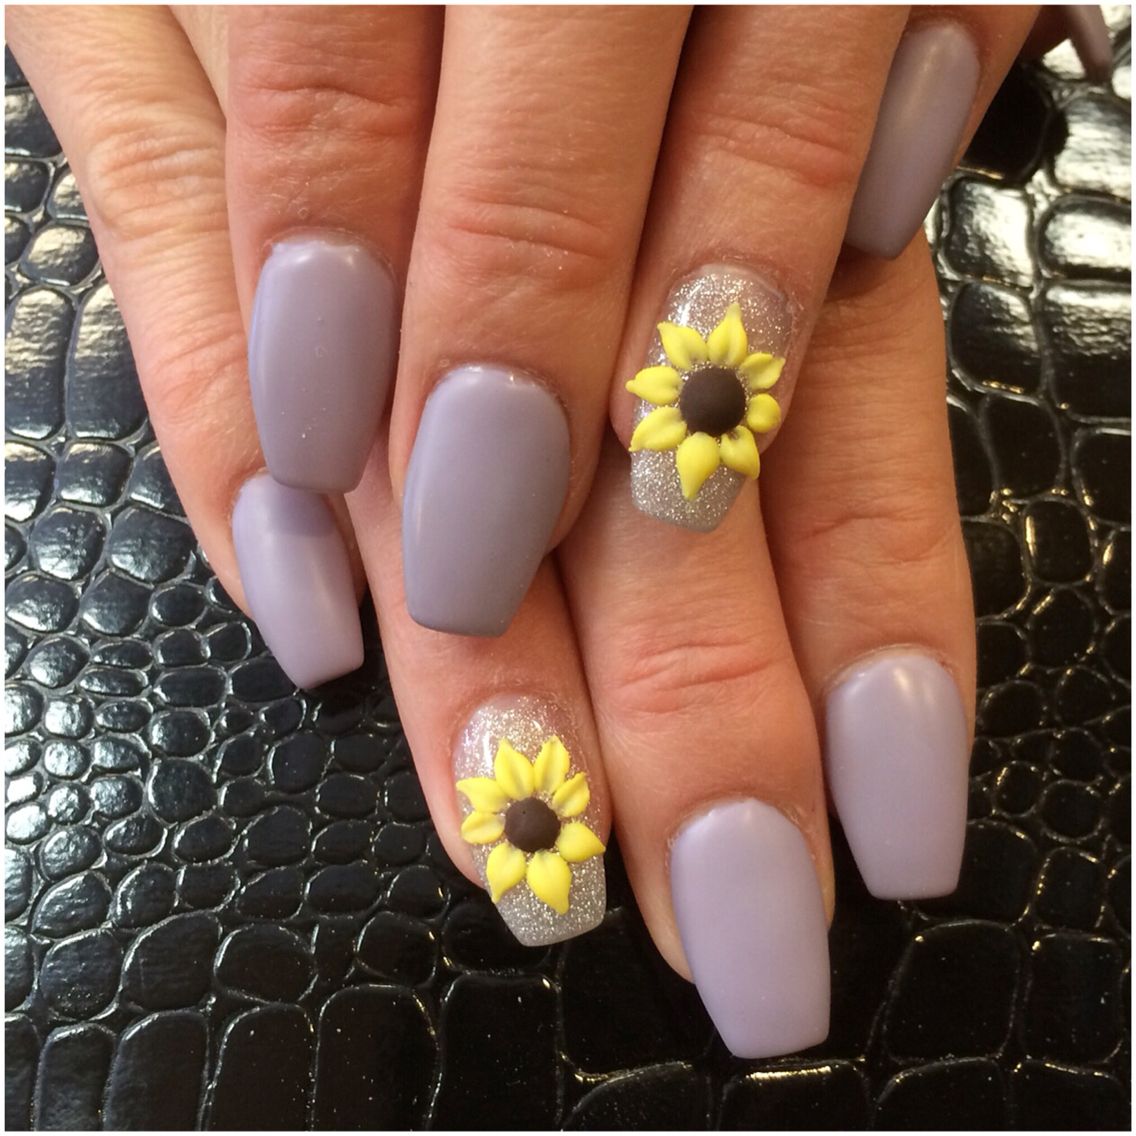 sunflower. 2 90+ Hottest 3D Acrylic Nails With Flower Designs - 44 3D acrylic nails with flower designs